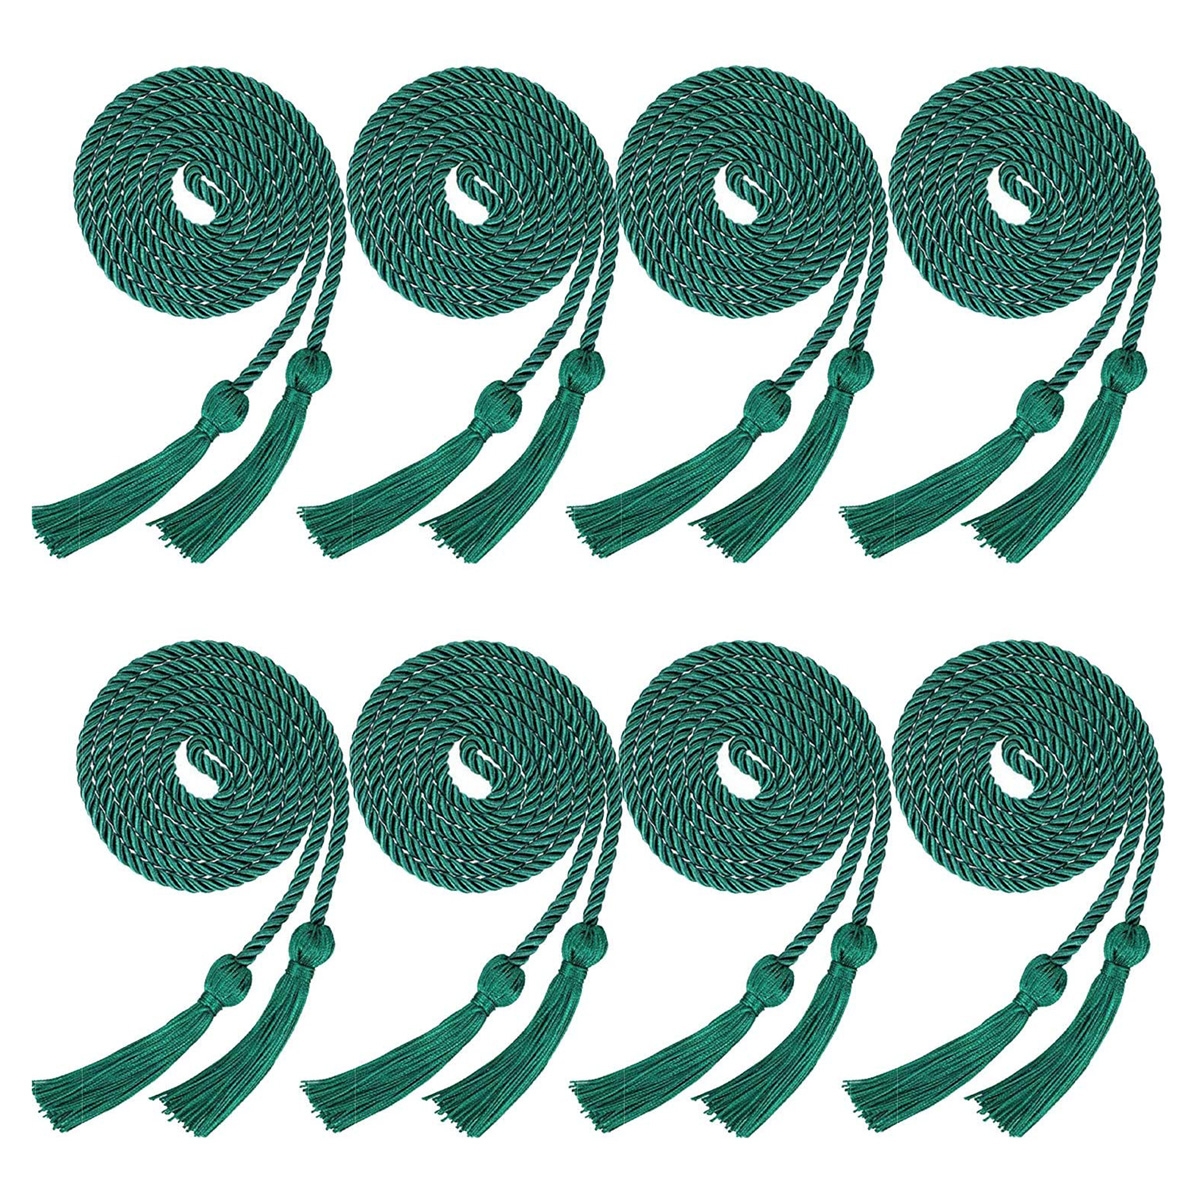 Cords Yarn Honor Cords with Tassel for College Graduation Students (Green)